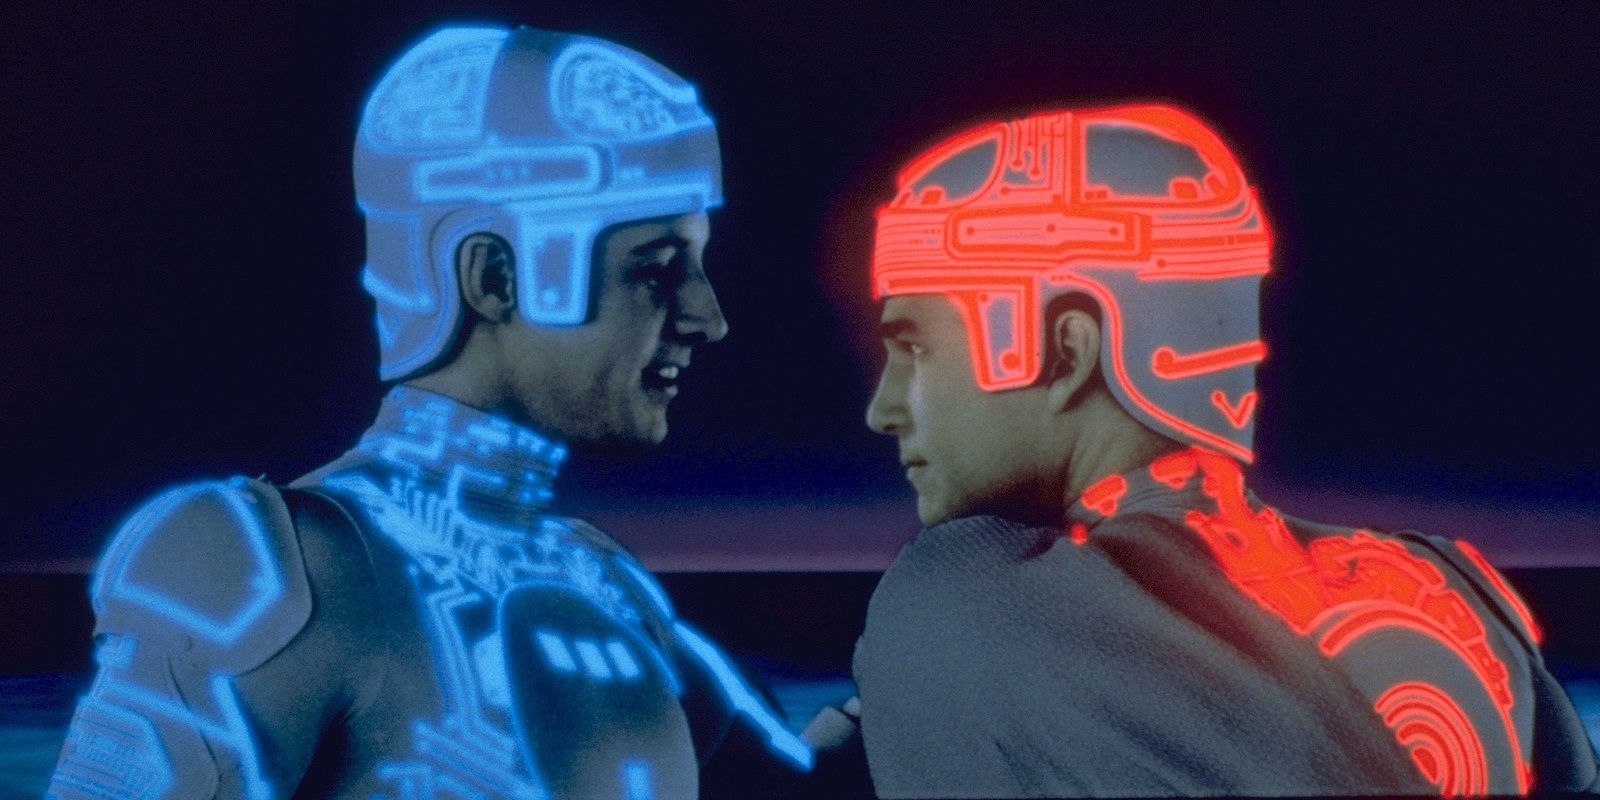 The blue racer and the red racer go head-to-head in Tron